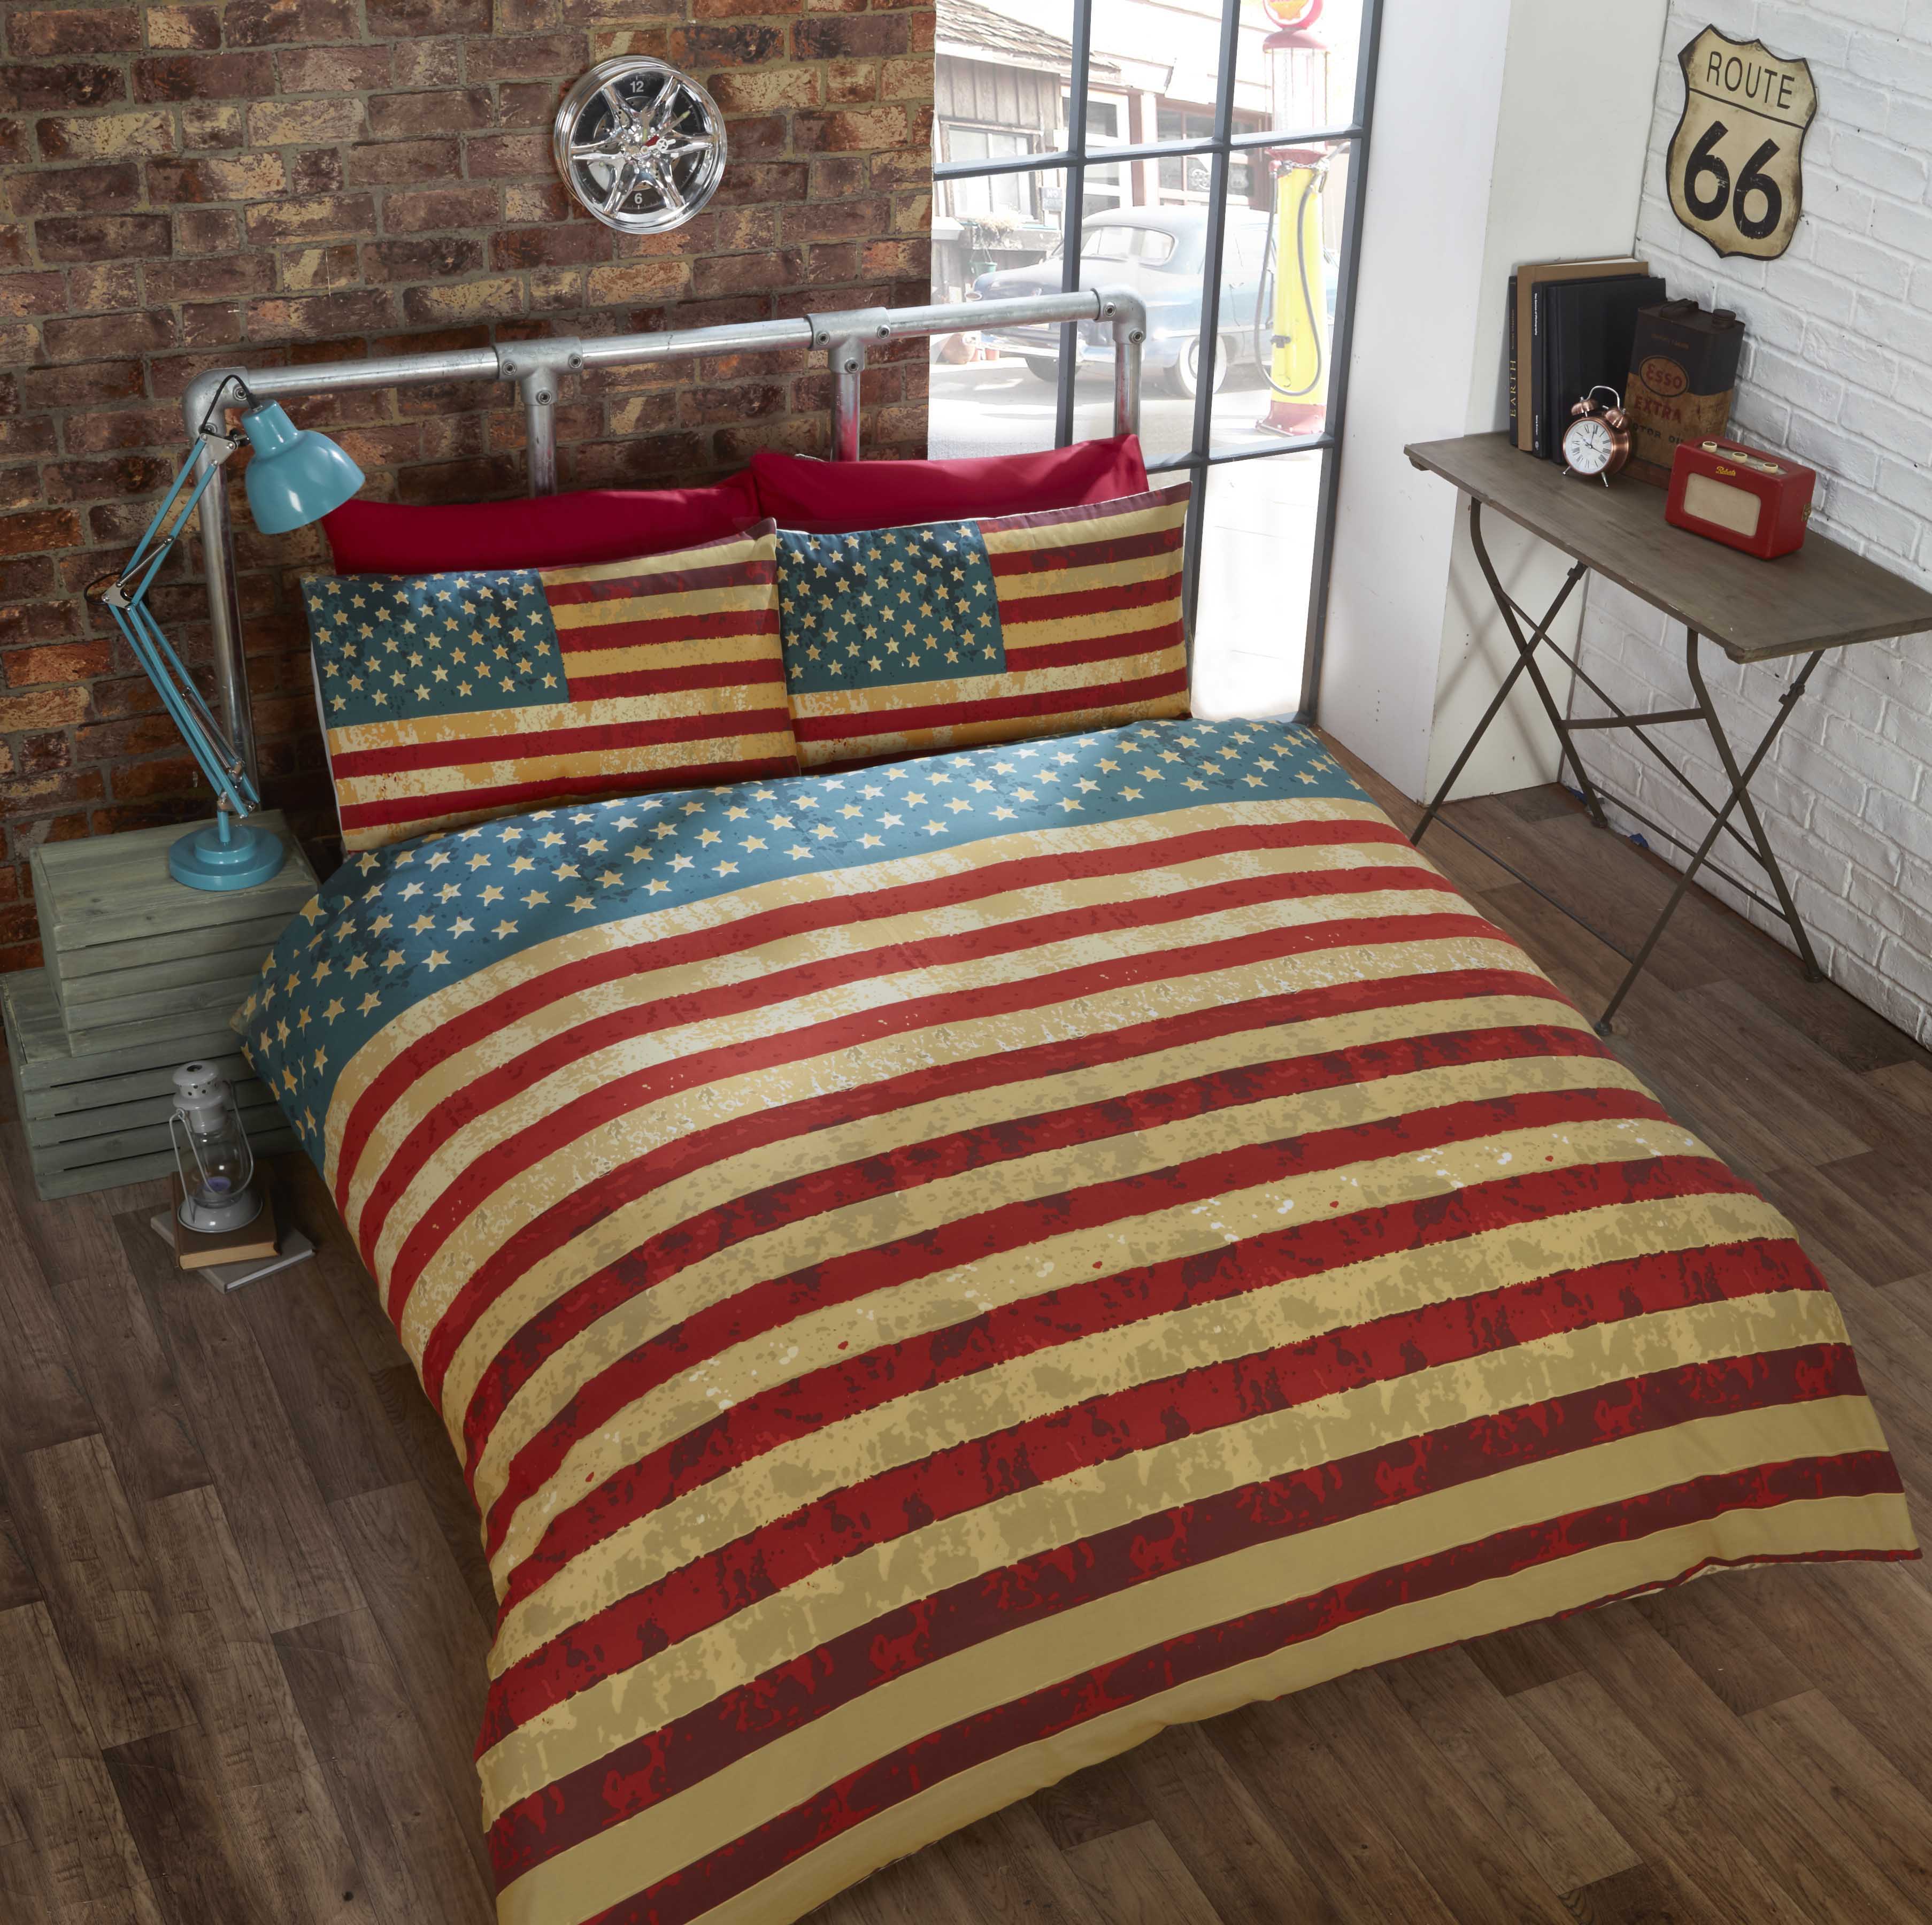 All around the World and Flags Duvet Sets